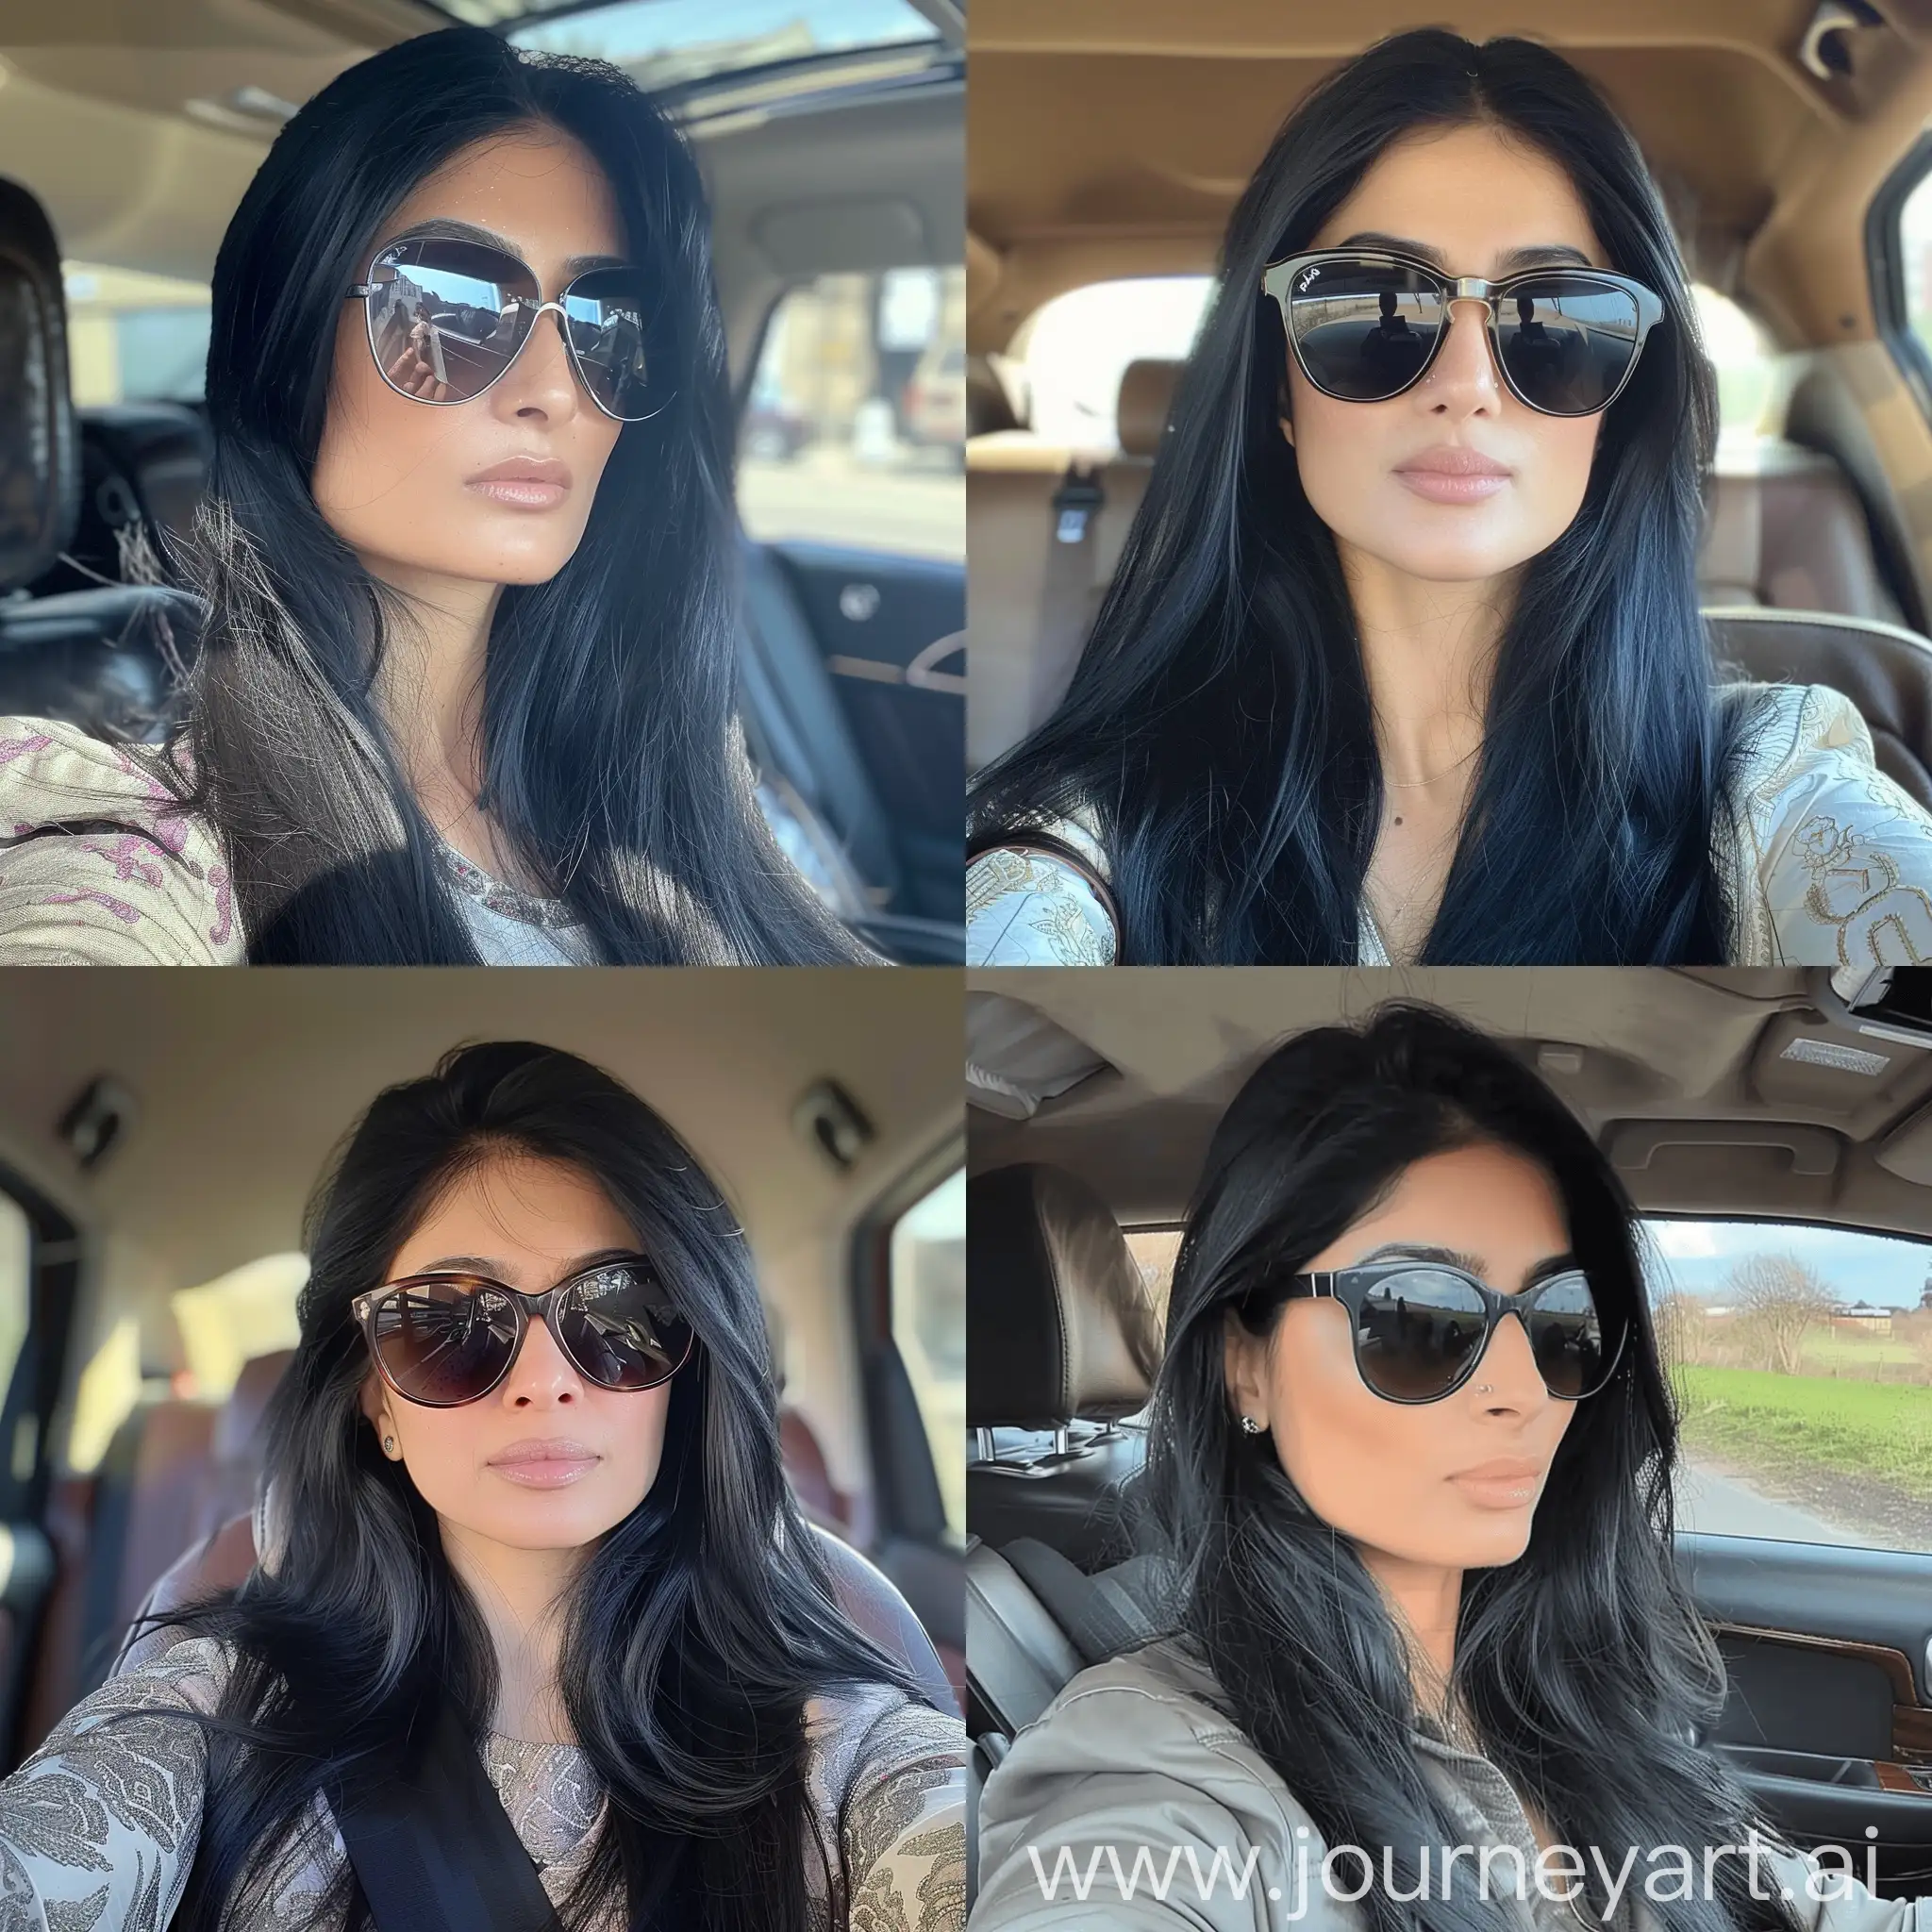 Stylish-British-Pakistani-Woman-Capturing-a-Car-Selfie-with-Long-Black-Hair-and-Sunglasses